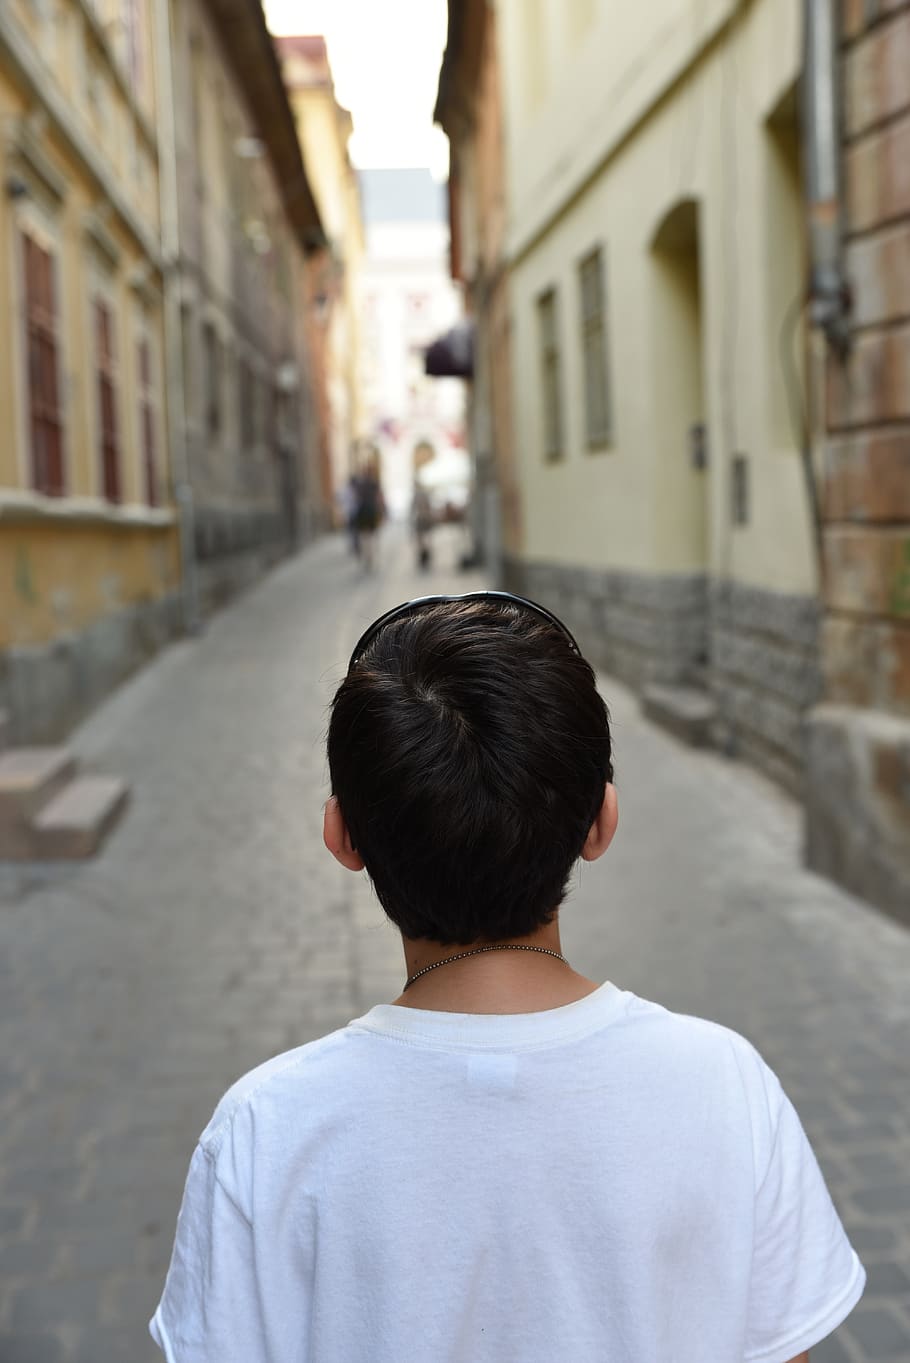 teenager, boy, back, old street, white shirt, architecture